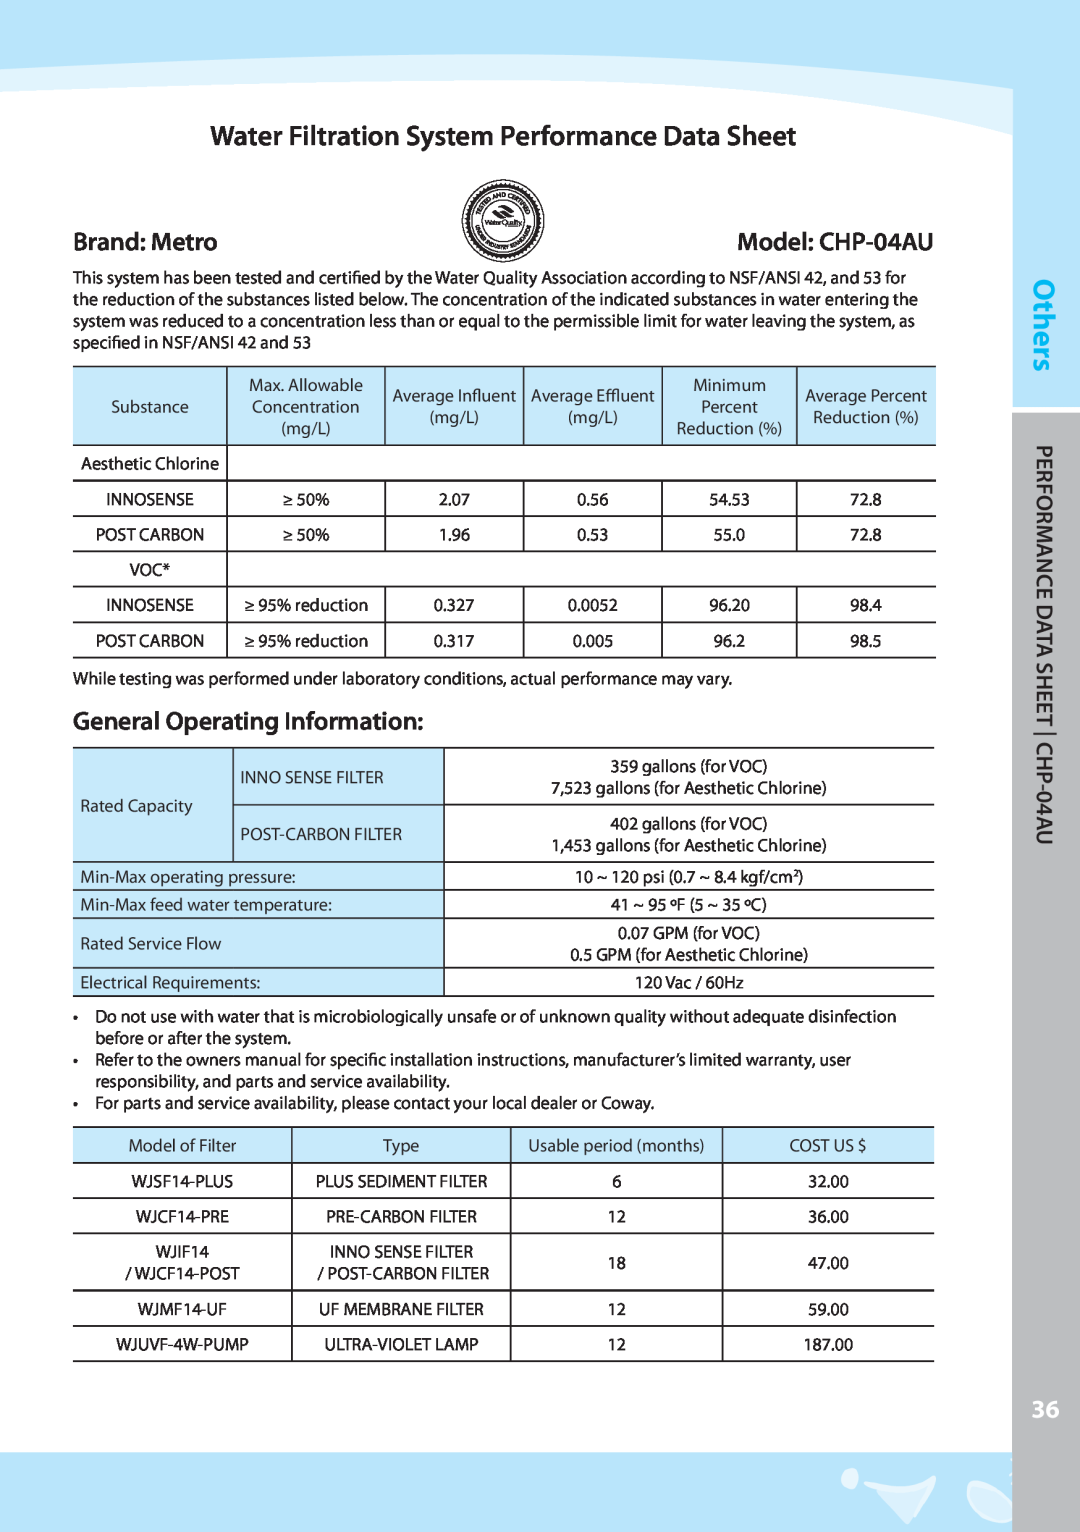 Coway CHP-04AL Model CHP-04AU, OthersM DPERFOR ANCE ATA SHEET CHP-04AU, Water Filtration System Performance Data Sheet 